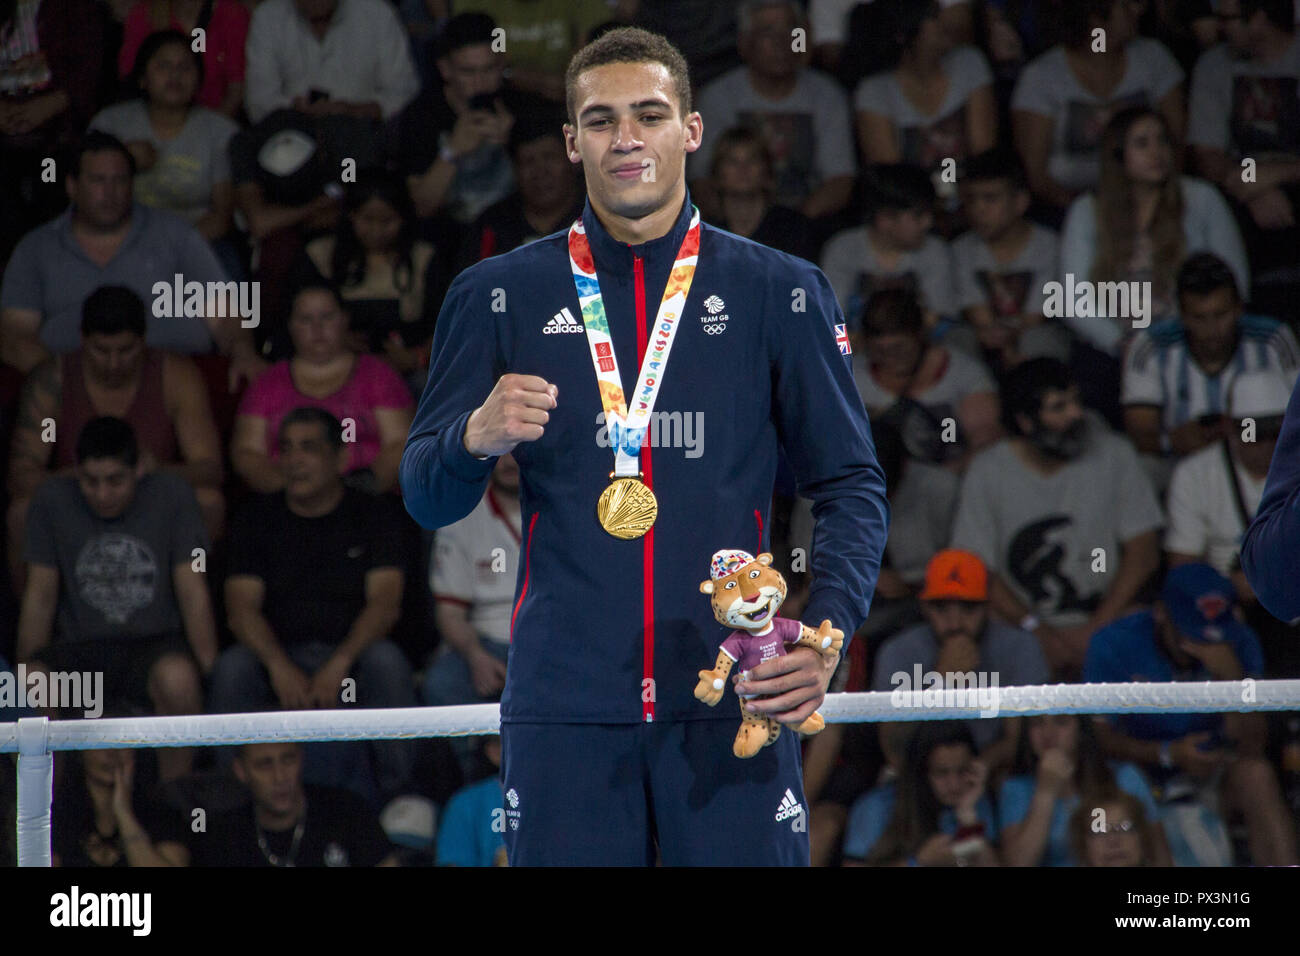 Buenos Aires, Buenos Aires, Argentina. 18th Oct, 2018. The British boxer Itauma Karol won the gold medal of the Men's Lightweight Weights (81 kg), in the Youth Olympic Games, Buenos Aires 2018, after three rounds. The Russian boxer Kolesnikov Ruslan, was winner of the Silver Medal. Credit: Roberto Almeida Aveledo/ZUMA Wire/Alamy Live News Stock Photo